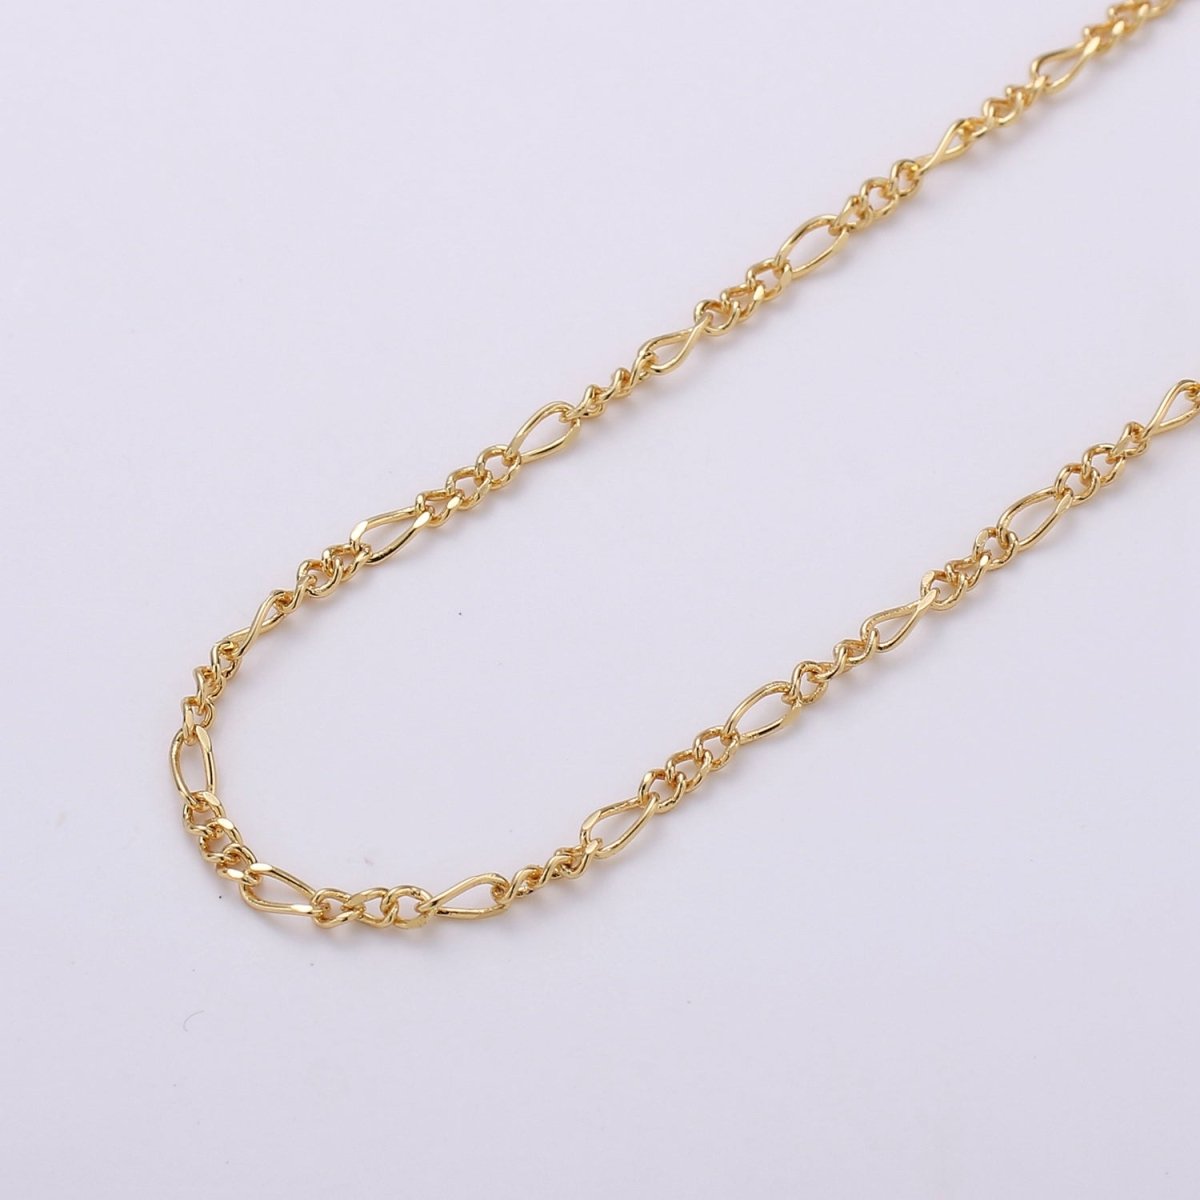 Dainty 2.5mm Figaro Long and Short Chain 16K Gold Filled Figaro Chain Jewelry Chain Sold by the Yard for Necklace Bracelet Anklet Supply | ROLL-376 - DLUXCA